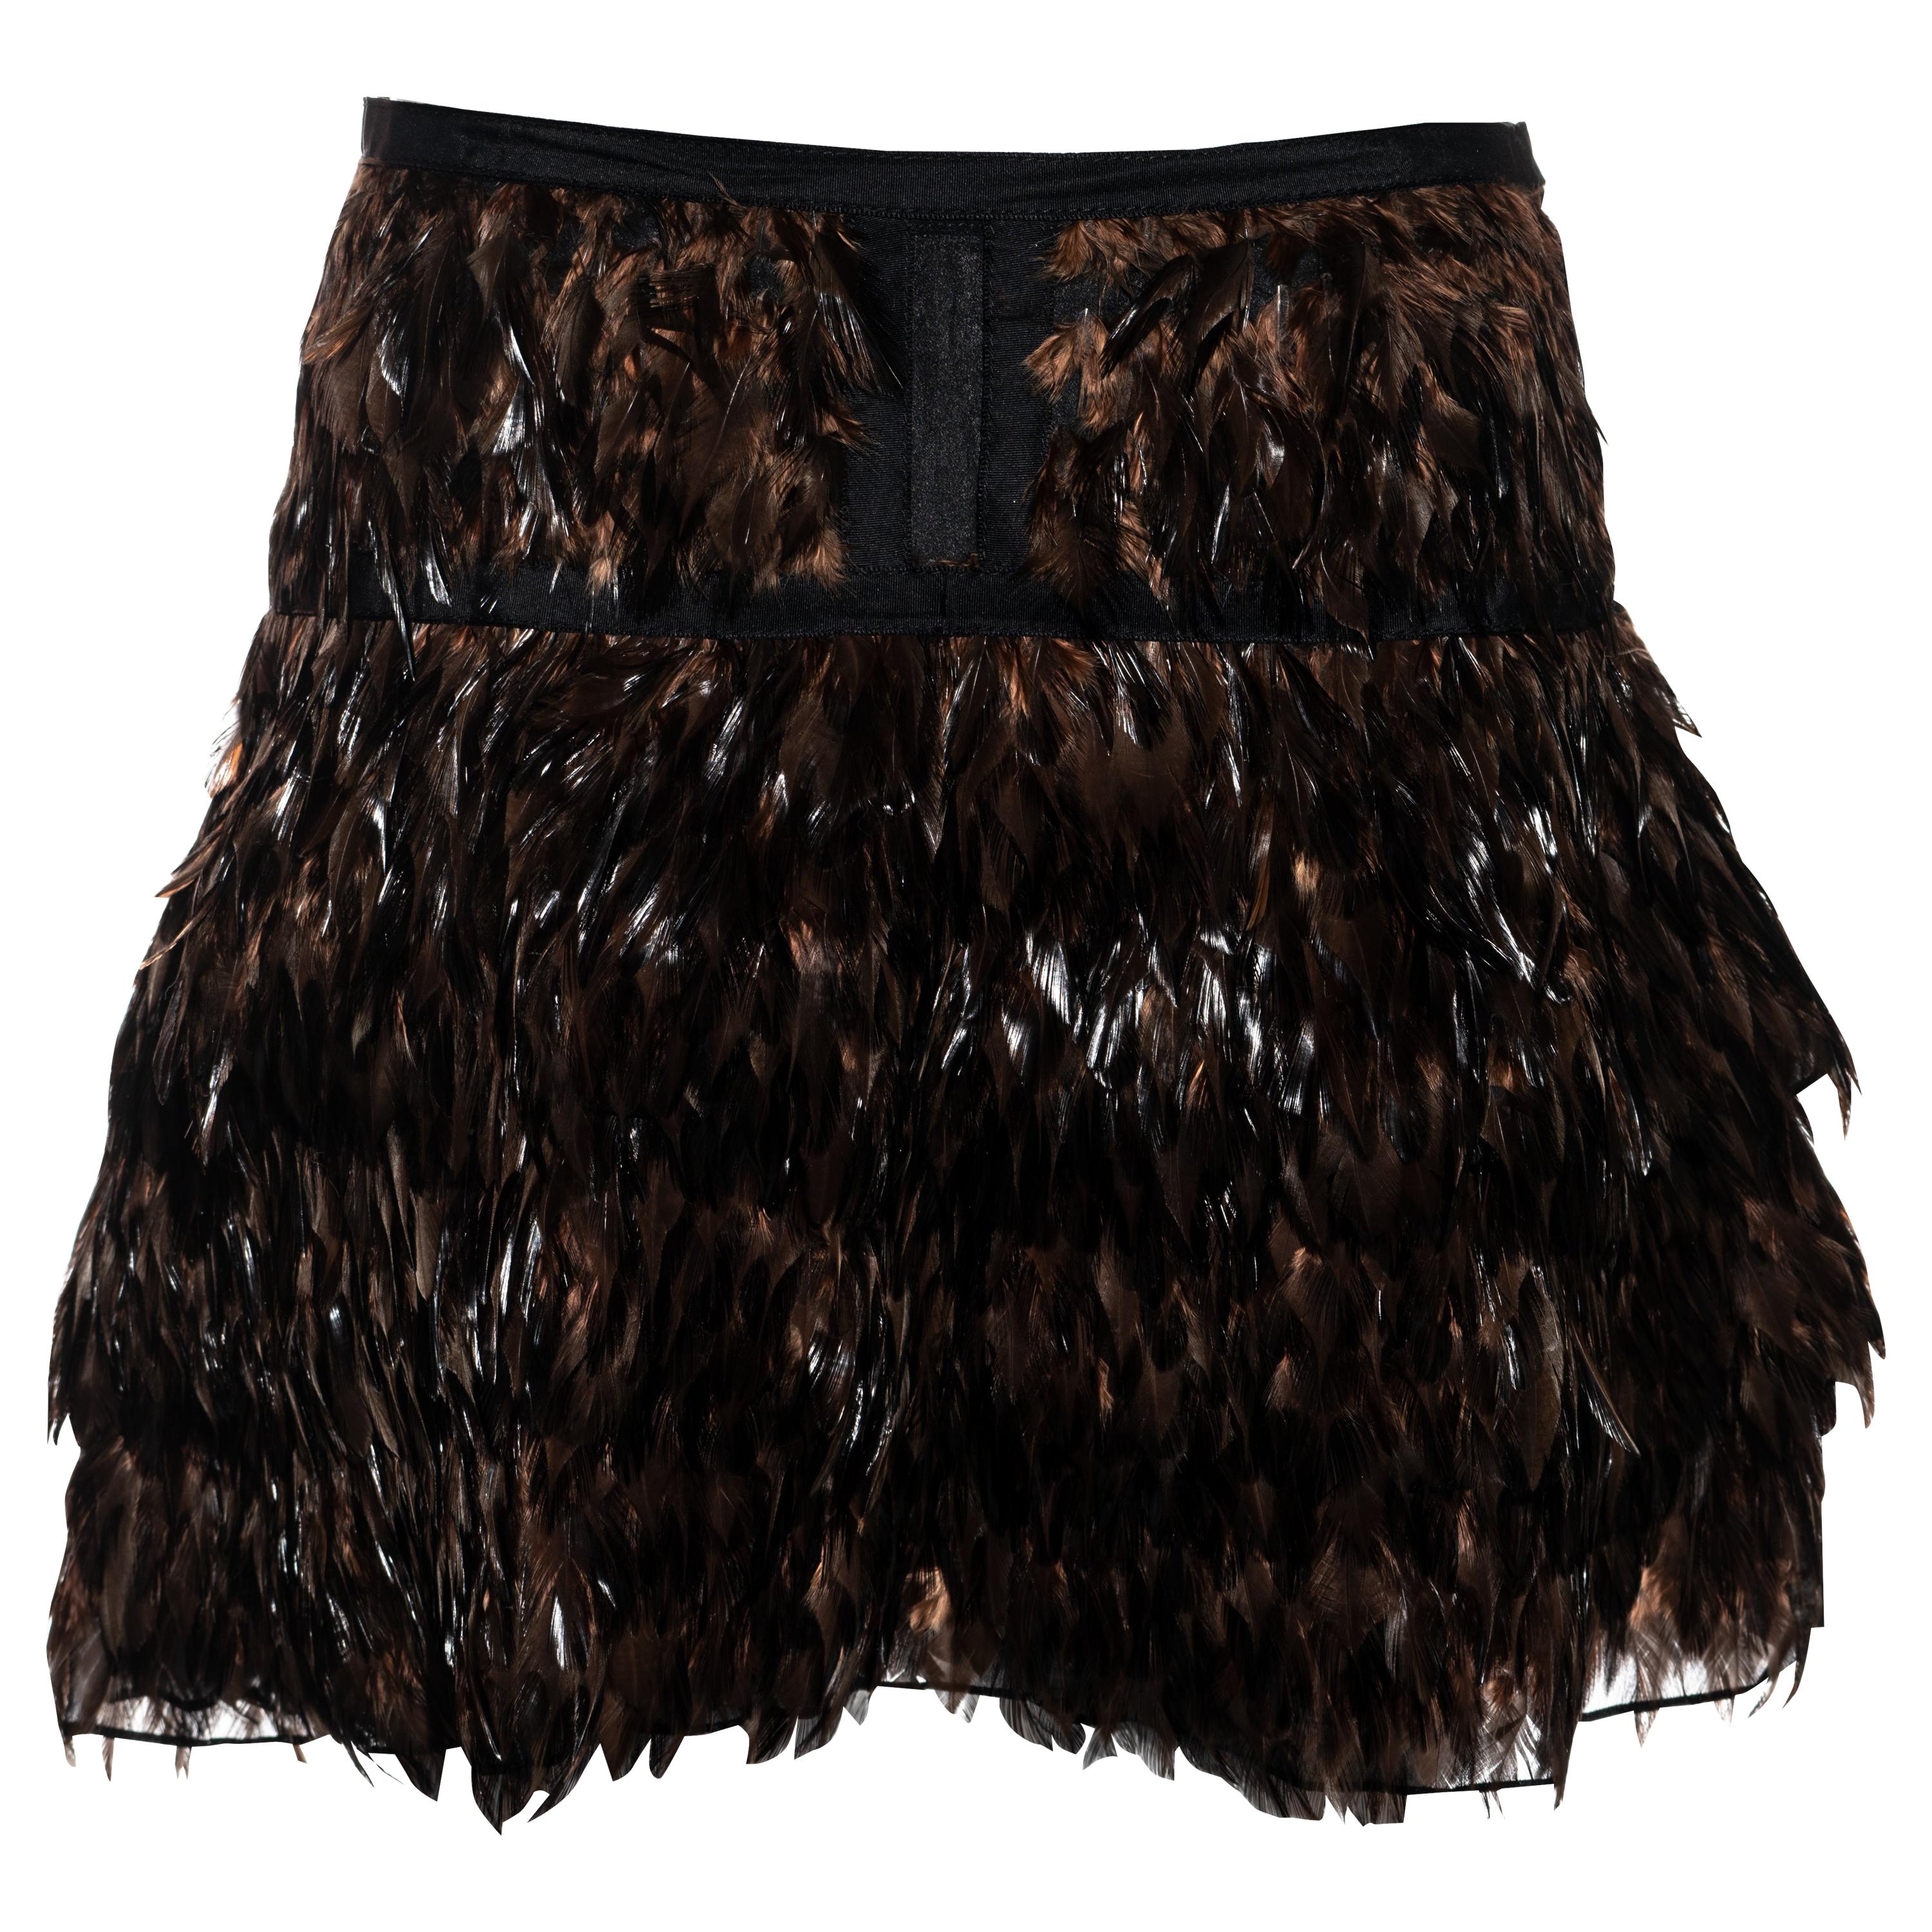 Gucci by Tom Ford silk organza mini skirt with brown feathers, ss 2003